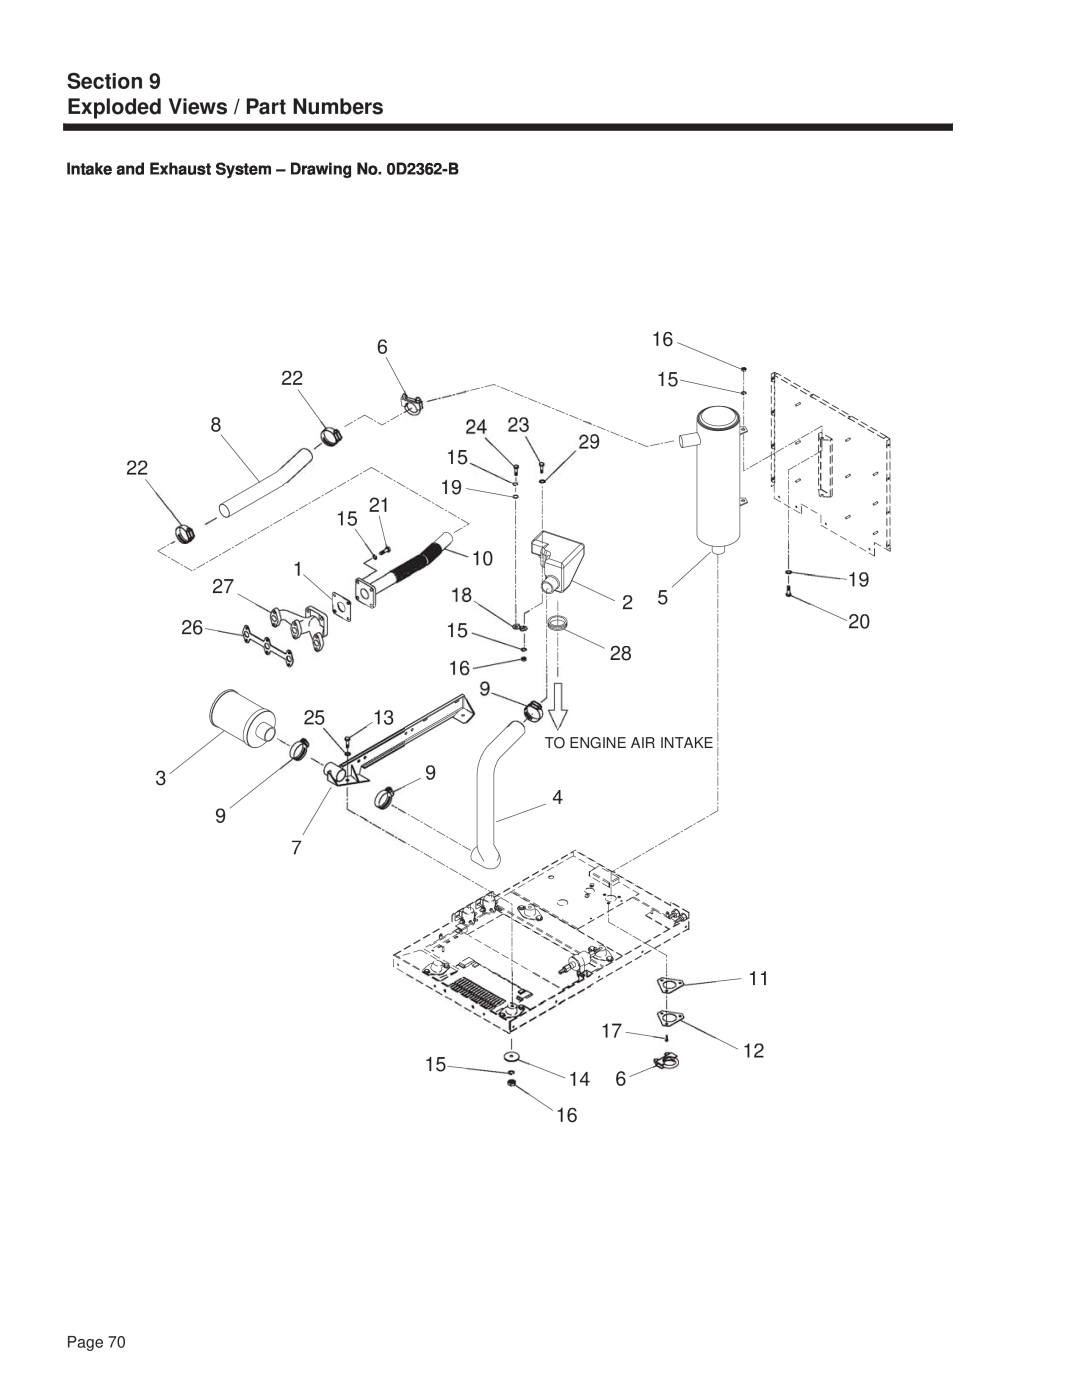 Guardian Technologies 4270 Section Exploded Views / Part Numbers, Intake and Exhaust System - Drawing No. 0D2362-B, Page 